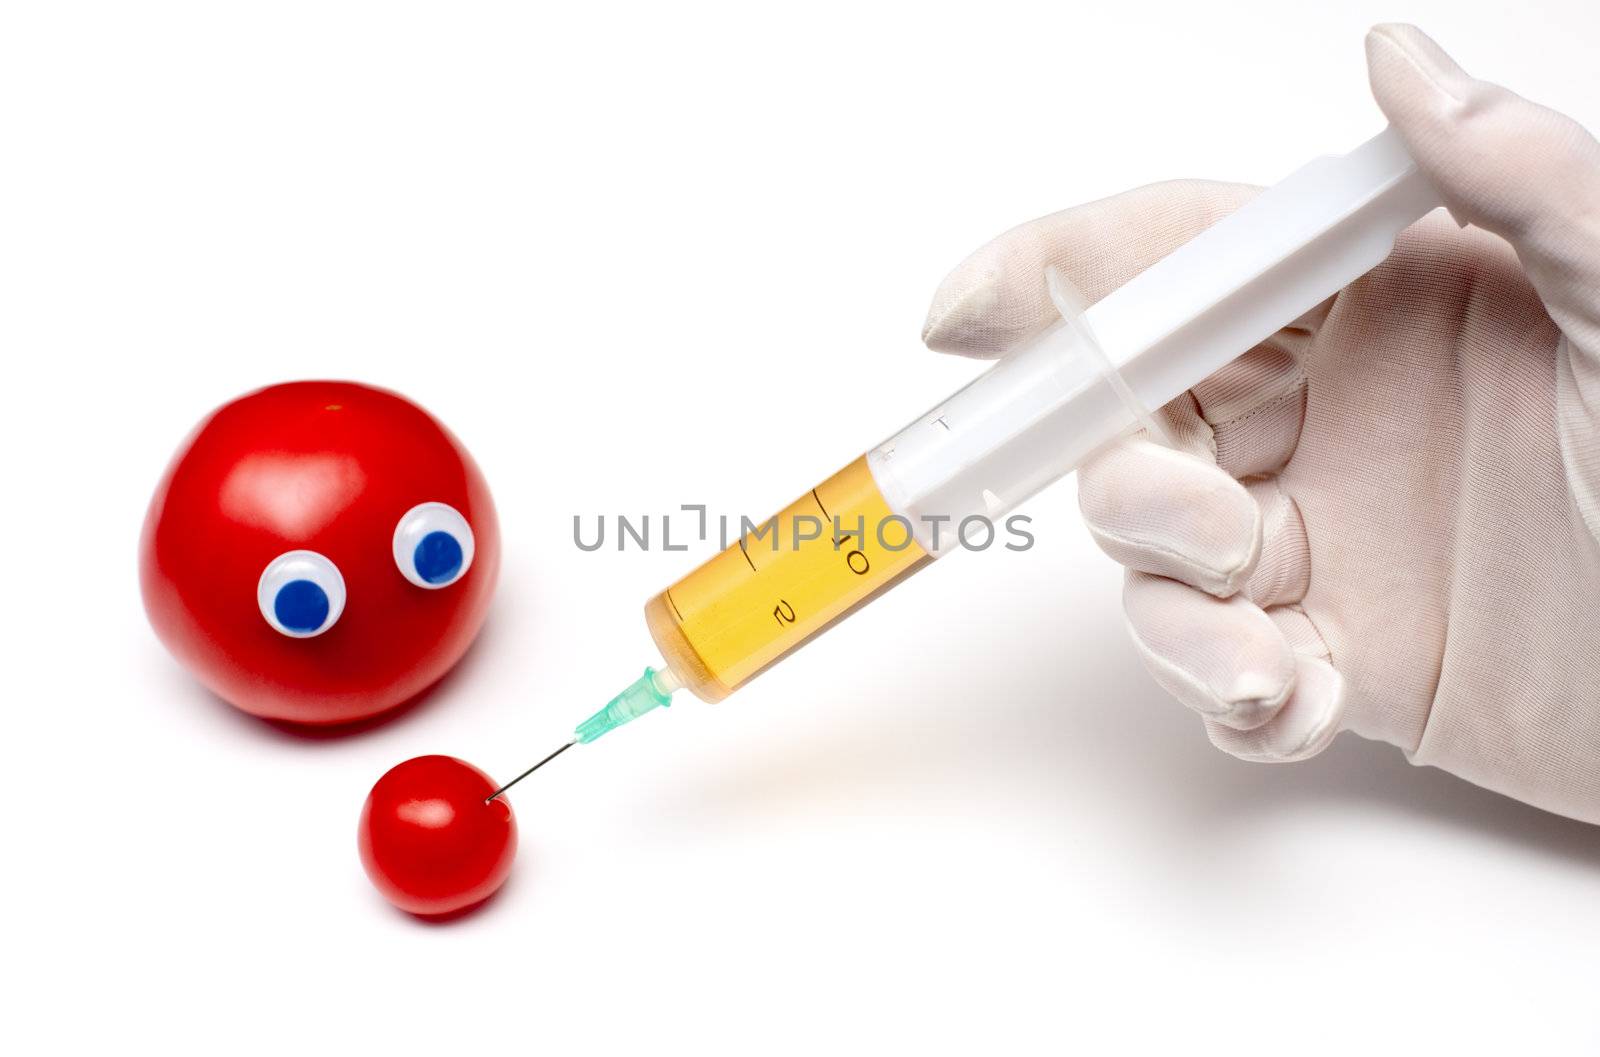 Genetic modification humorous concept with one tomato looking at another receiving an injection